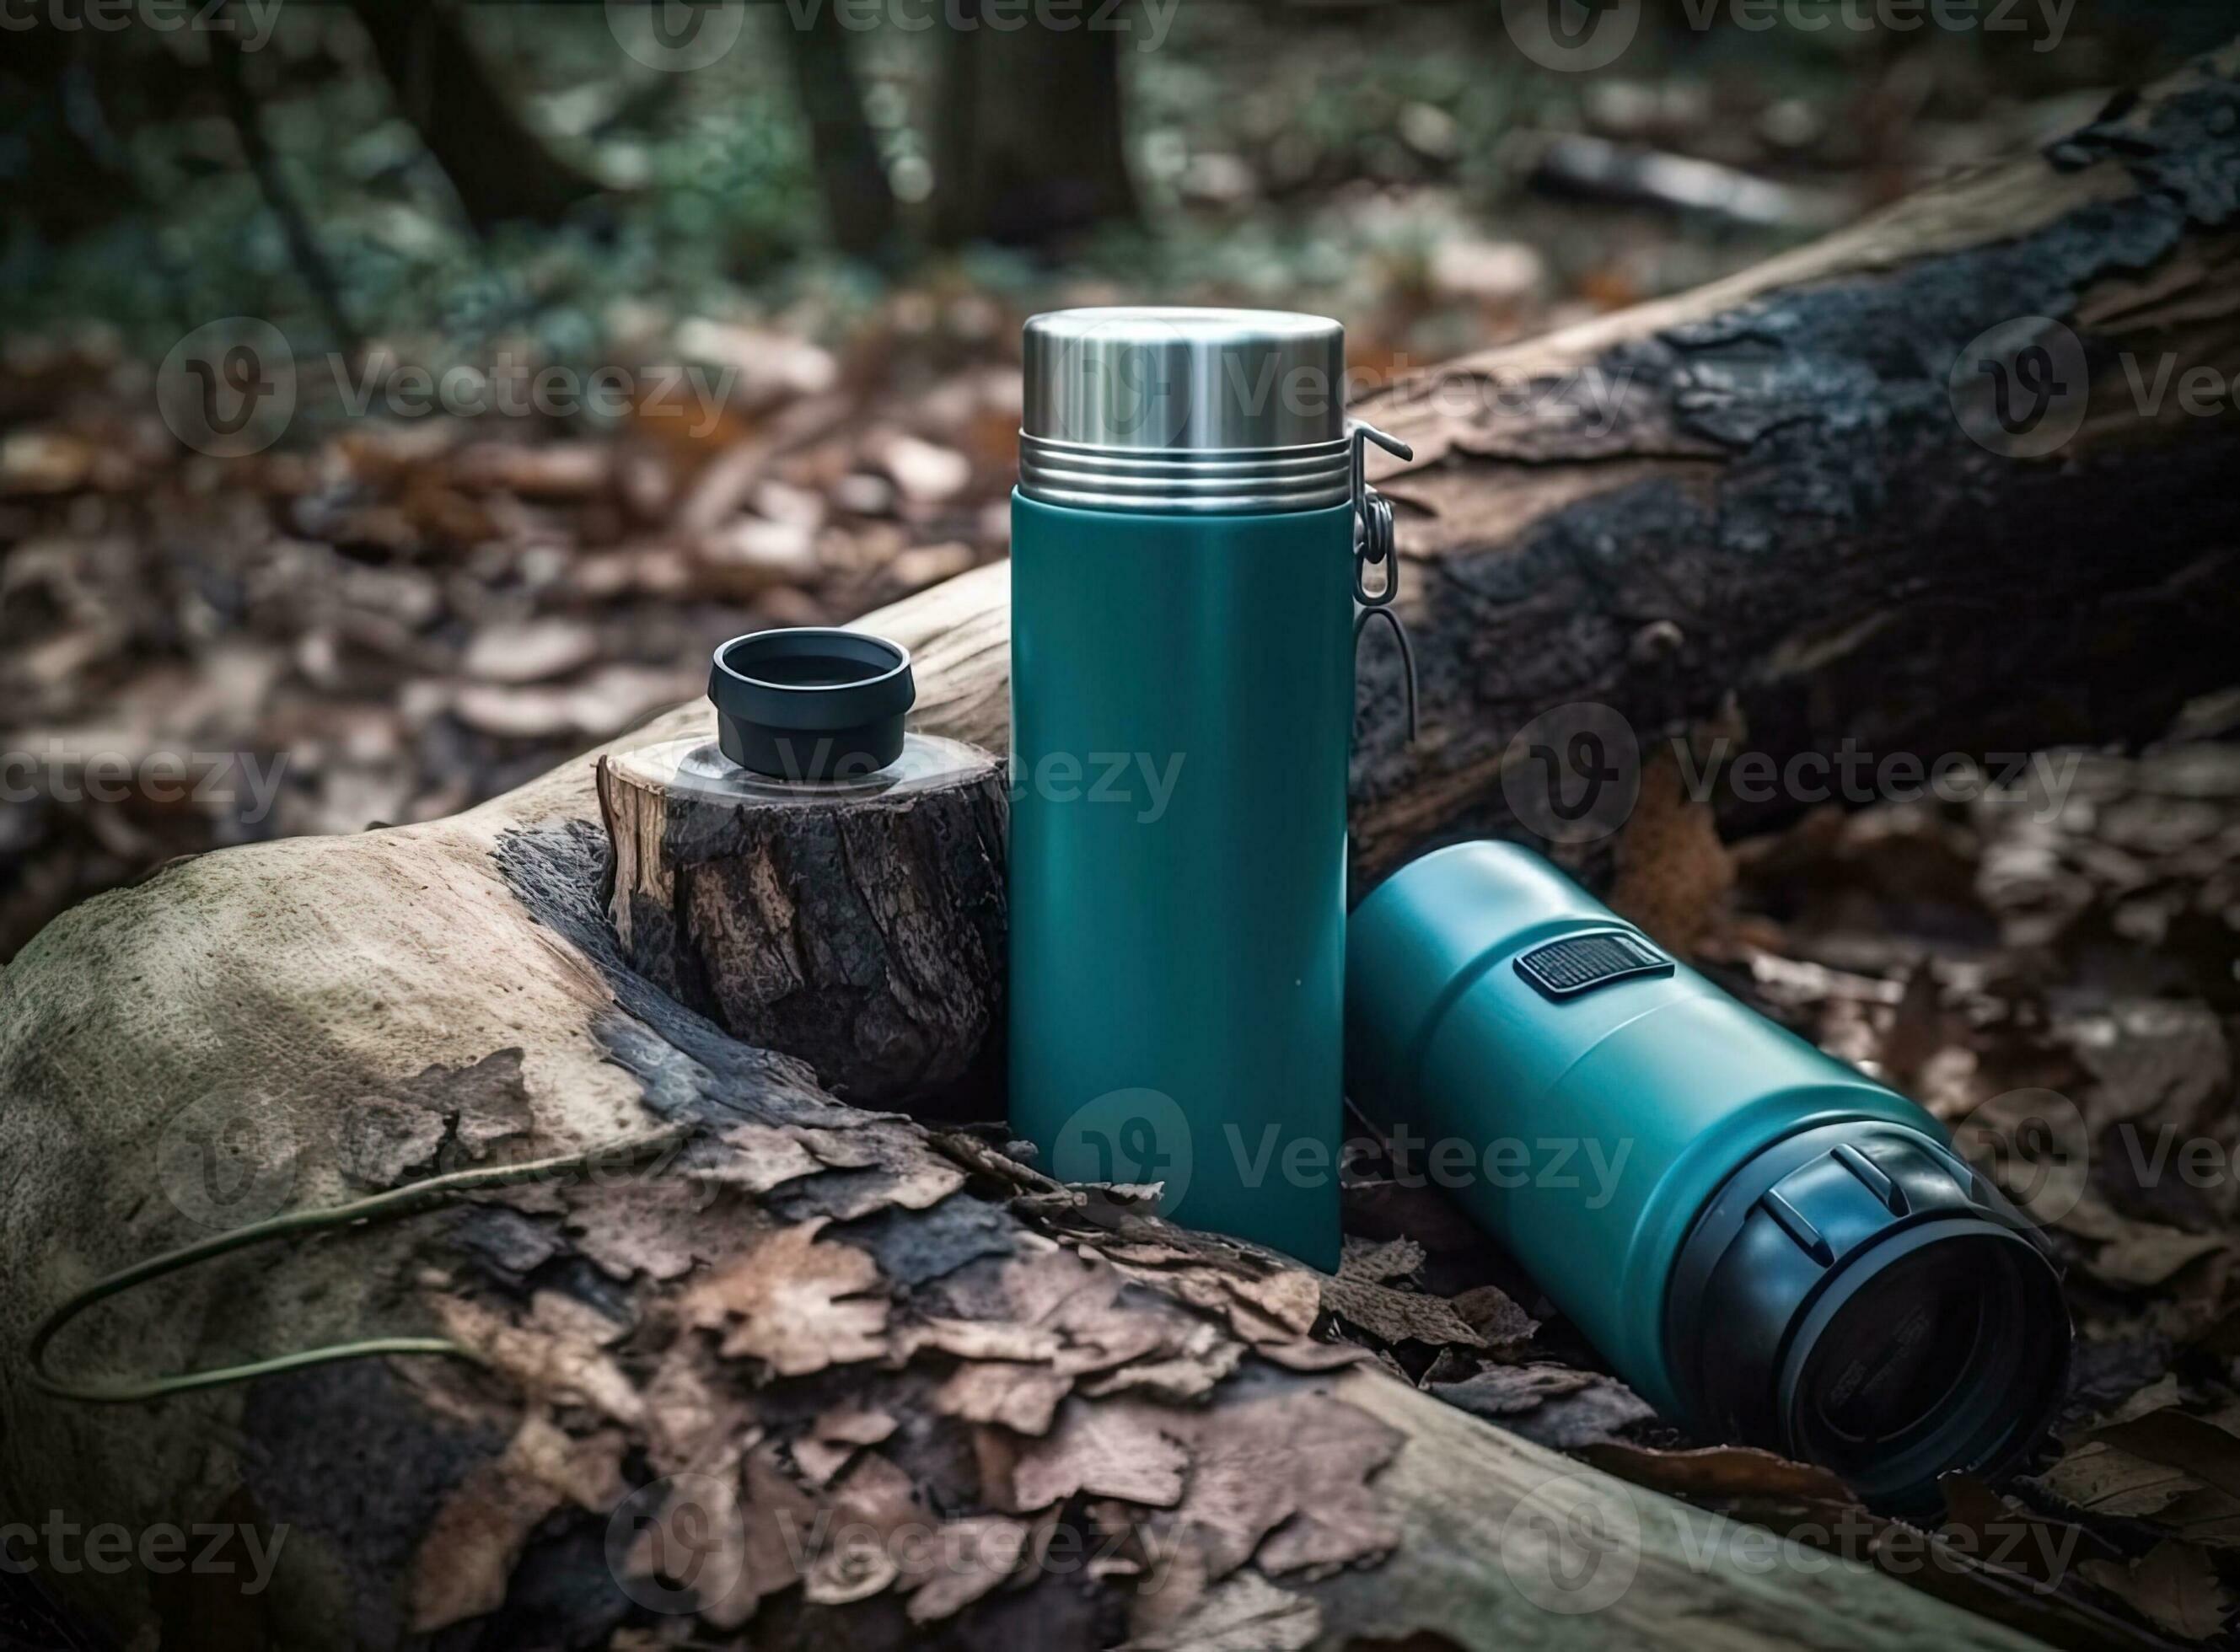 https://static.vecteezy.com/system/resources/previews/026/954/292/large_2x/thermos-and-aluminum-hot-drink-mug-with-rising-steam-outdoors-camping-vacuum-flask-and-iron-cup-standing-on-tree-stump-in-rainy-cold-weather-created-with-generative-ai-technology-photo.jpeg